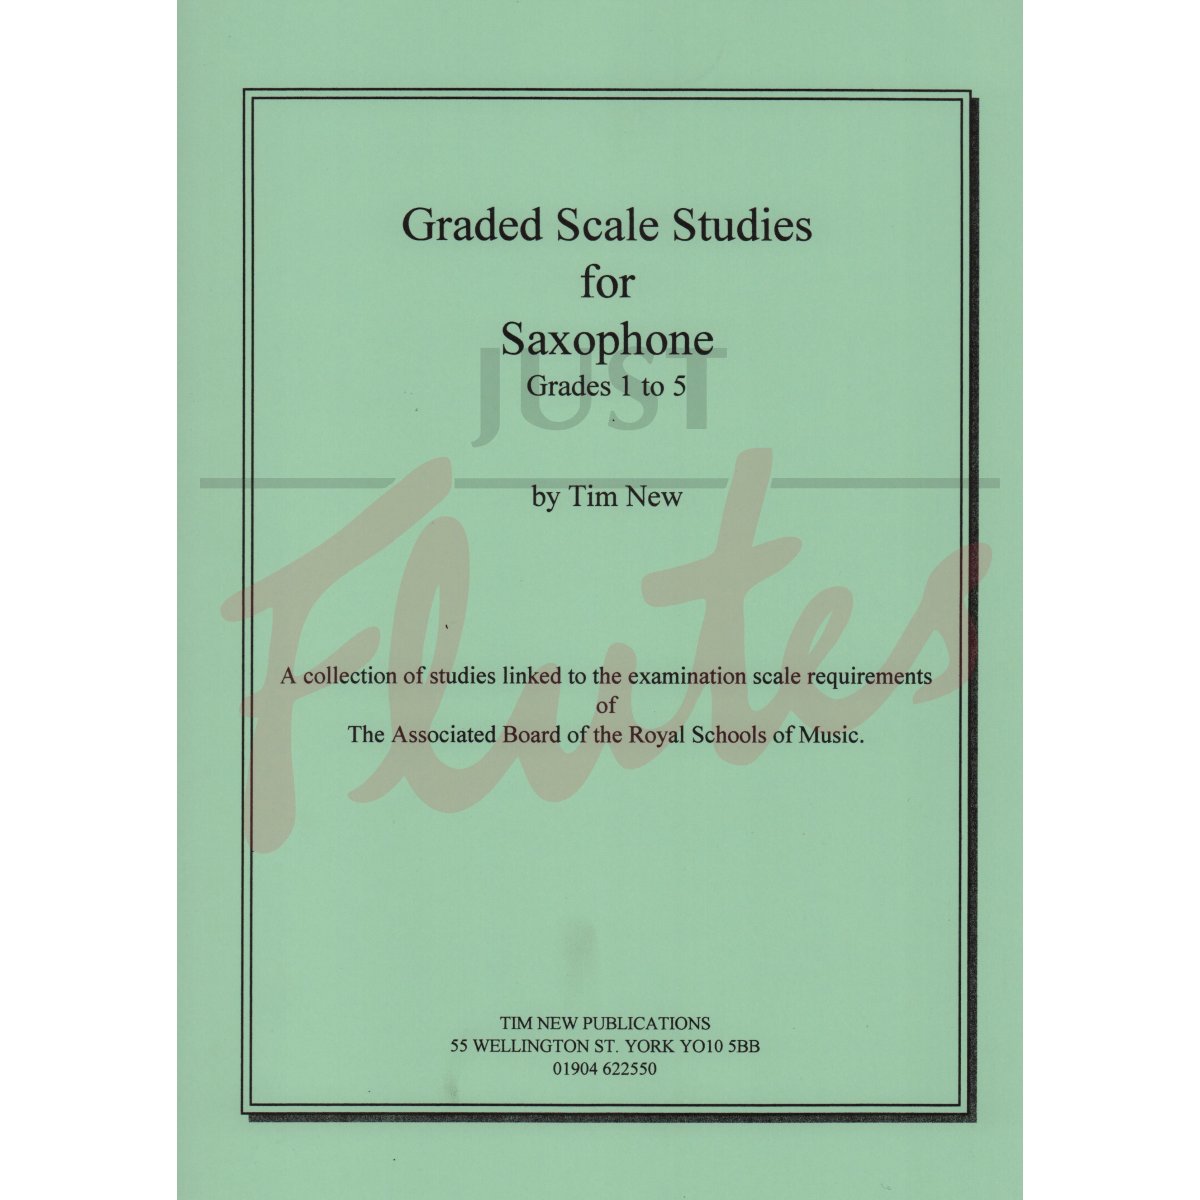 Graded Scale Studies for Saxophone Grades 1-5